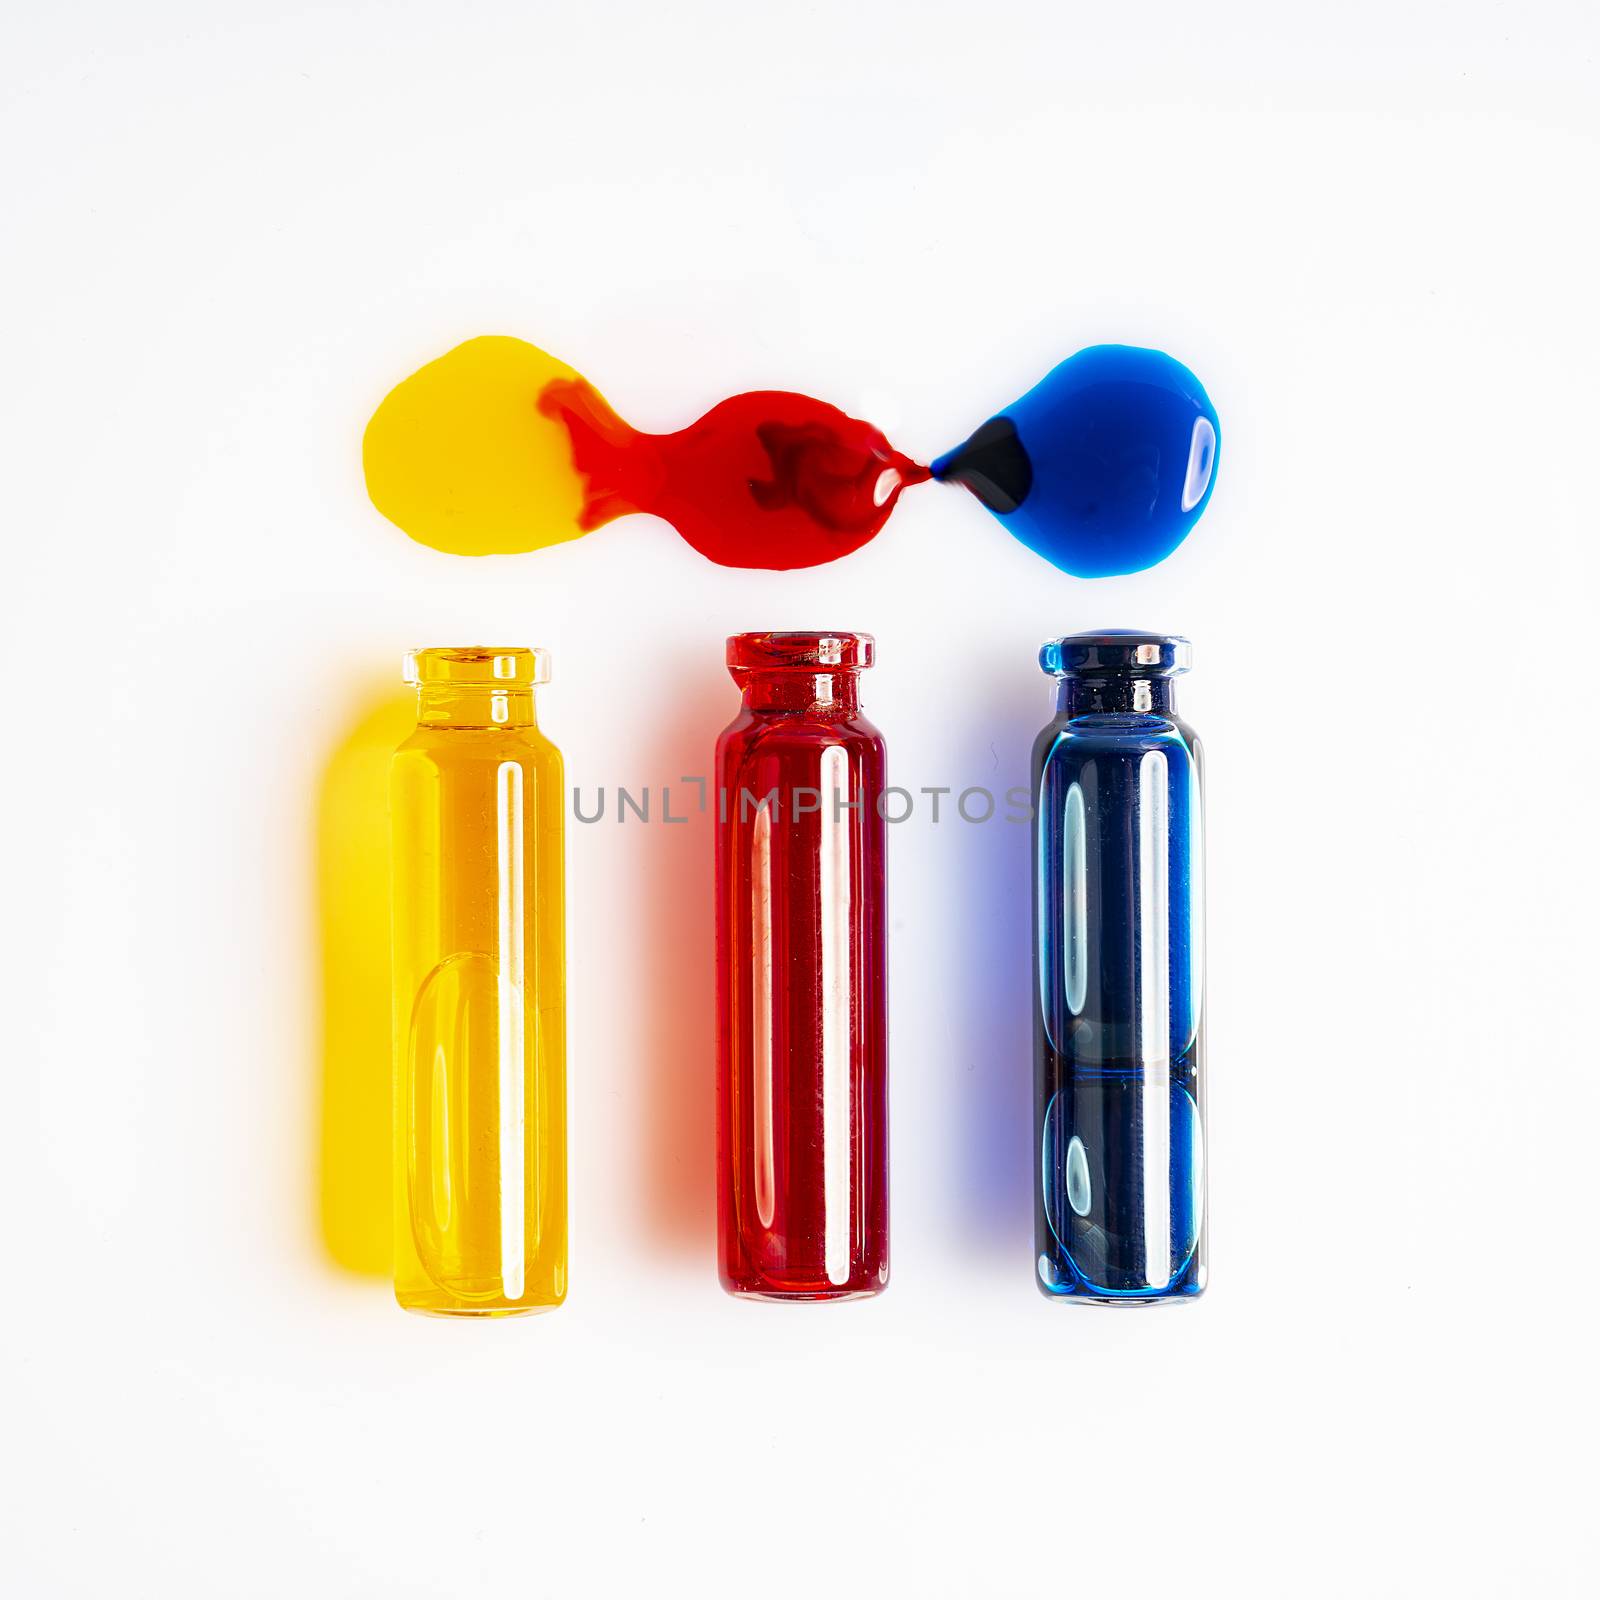 the fall of glass flasks with the contamination between colored liquids